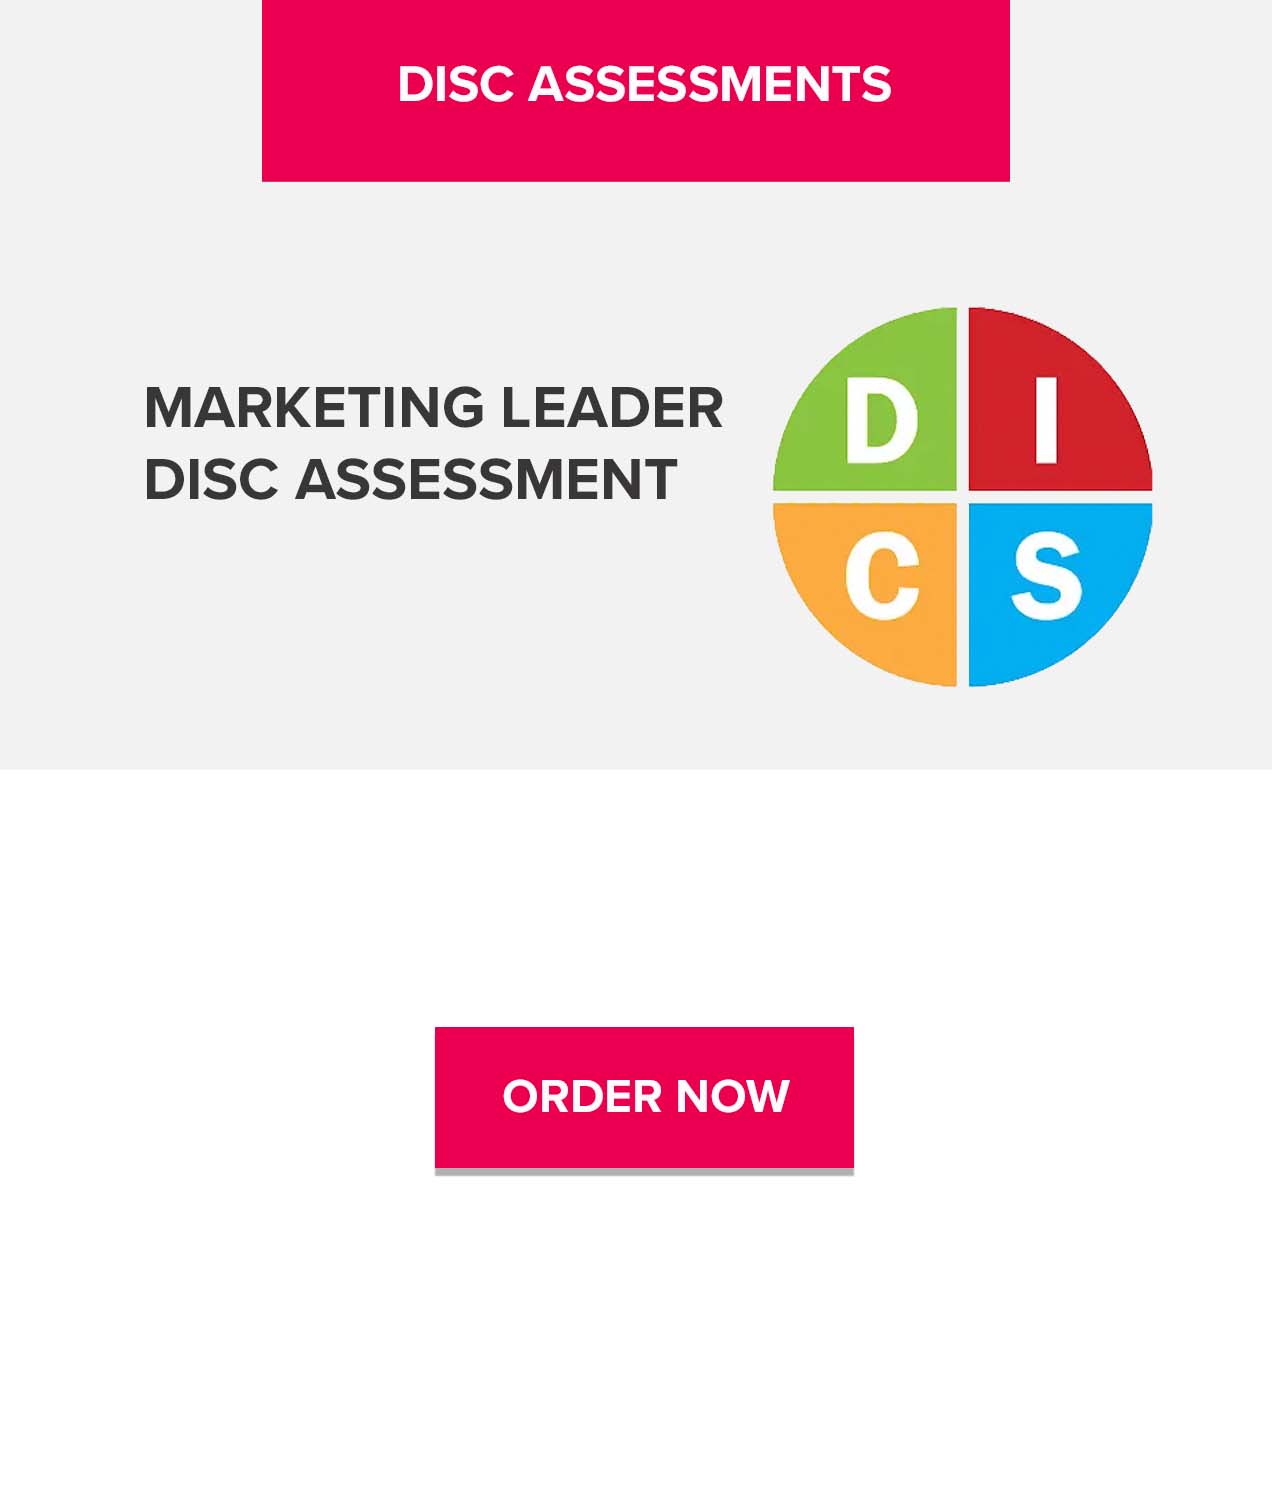 DISC Assessment for Marketers who want to communicate better with co-workers and executives